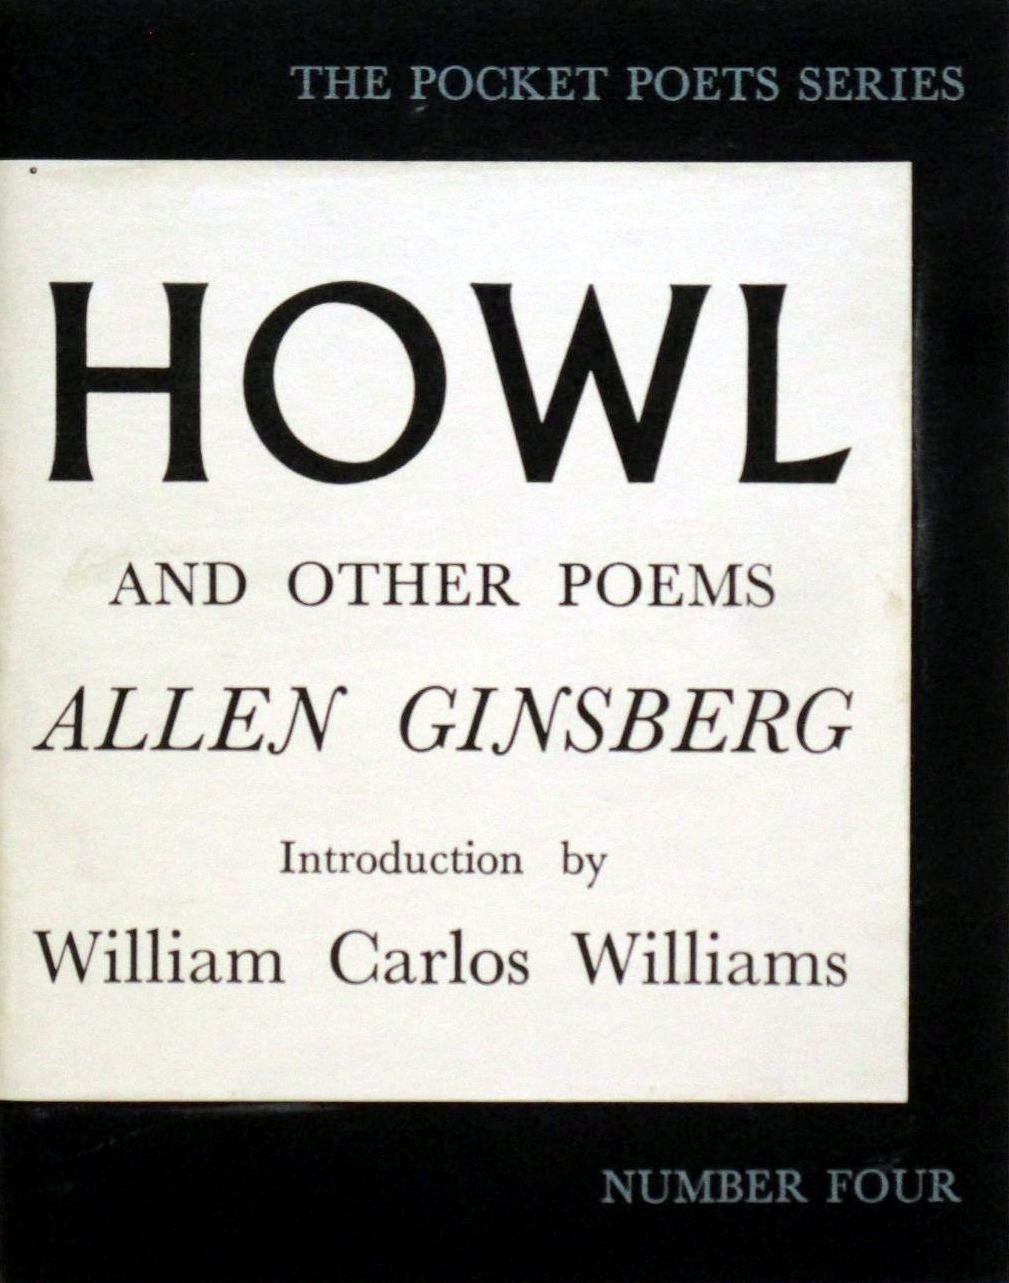 First-edition cover of Howl and Other Poems